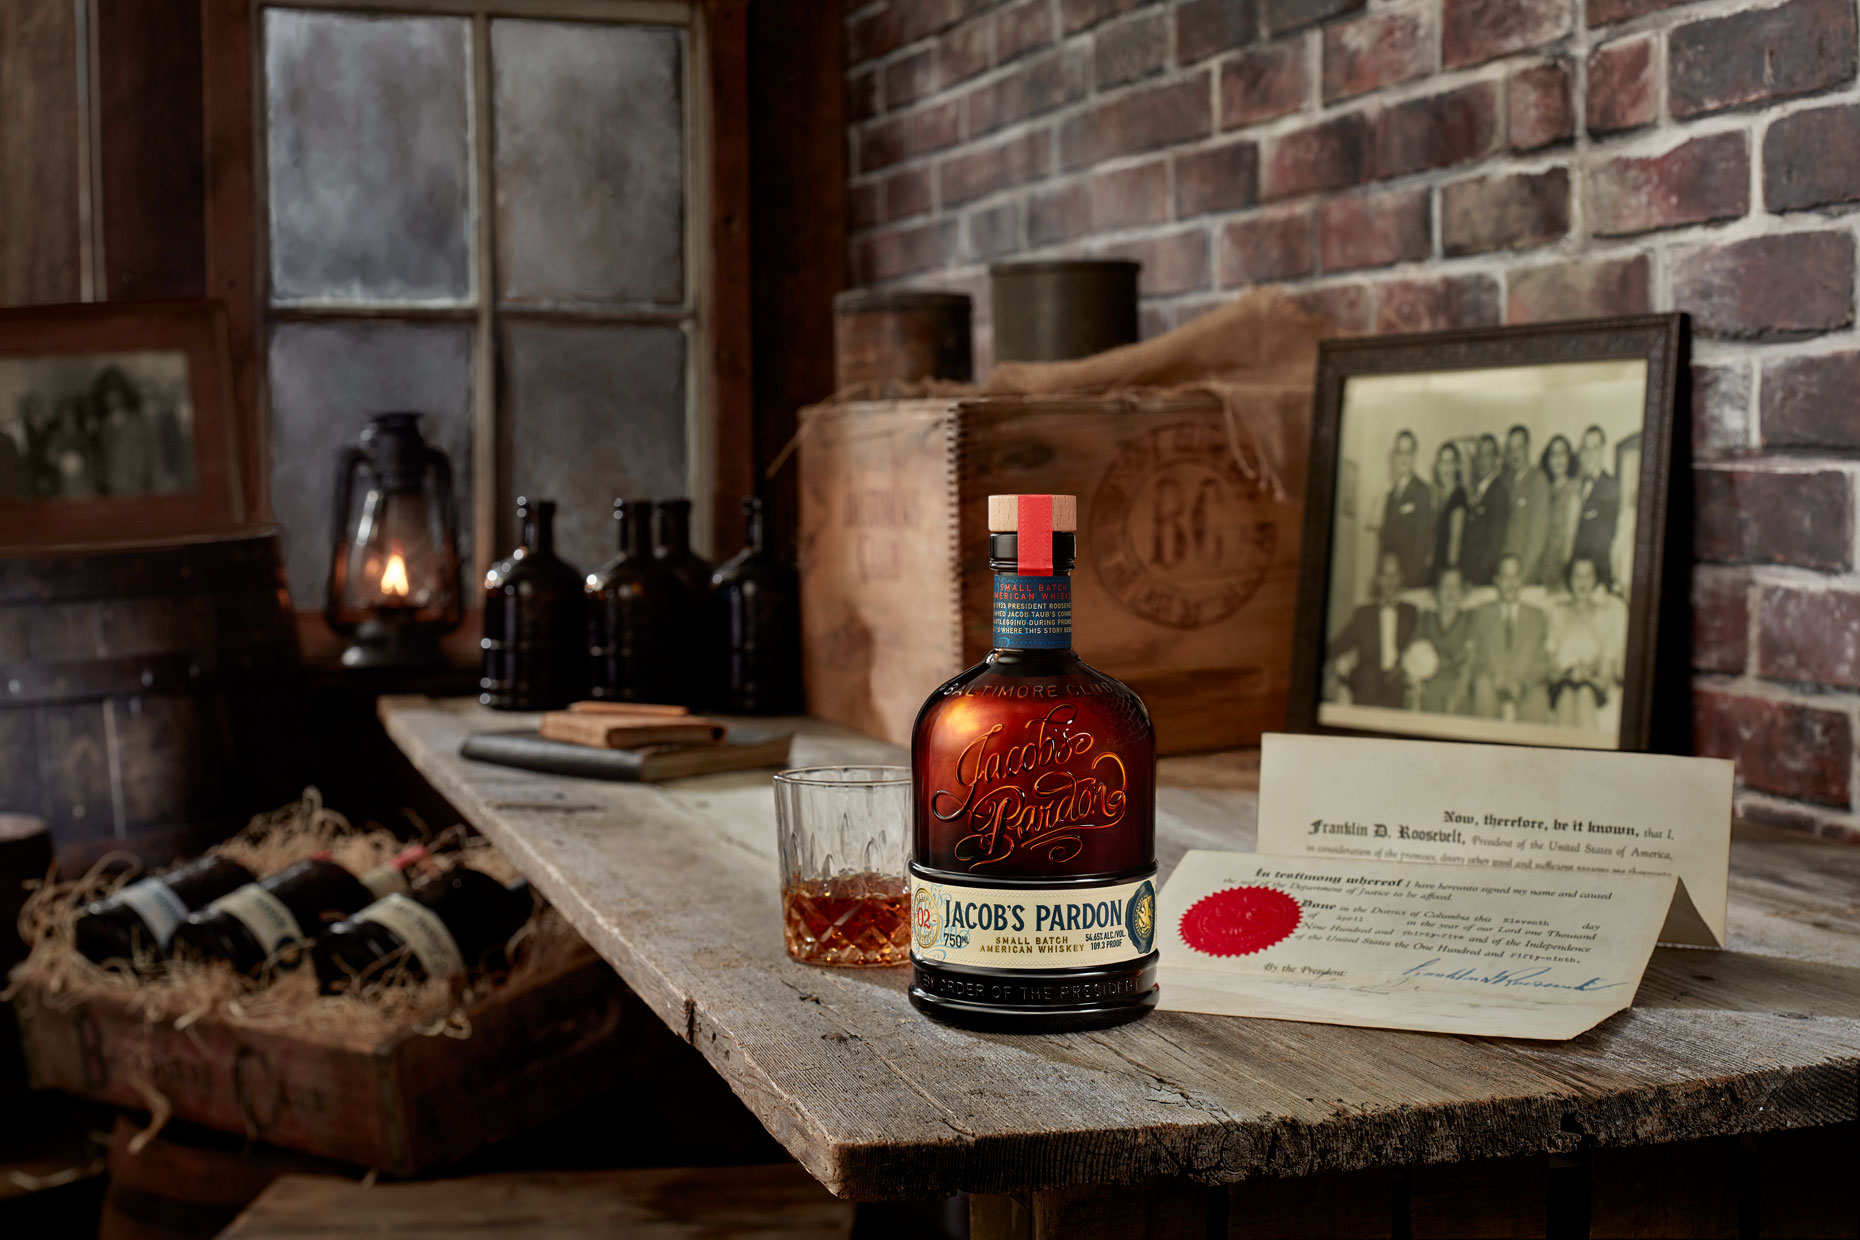 Jacobs Pardon Whiskey| Bottle Photography in Rustic Environment 